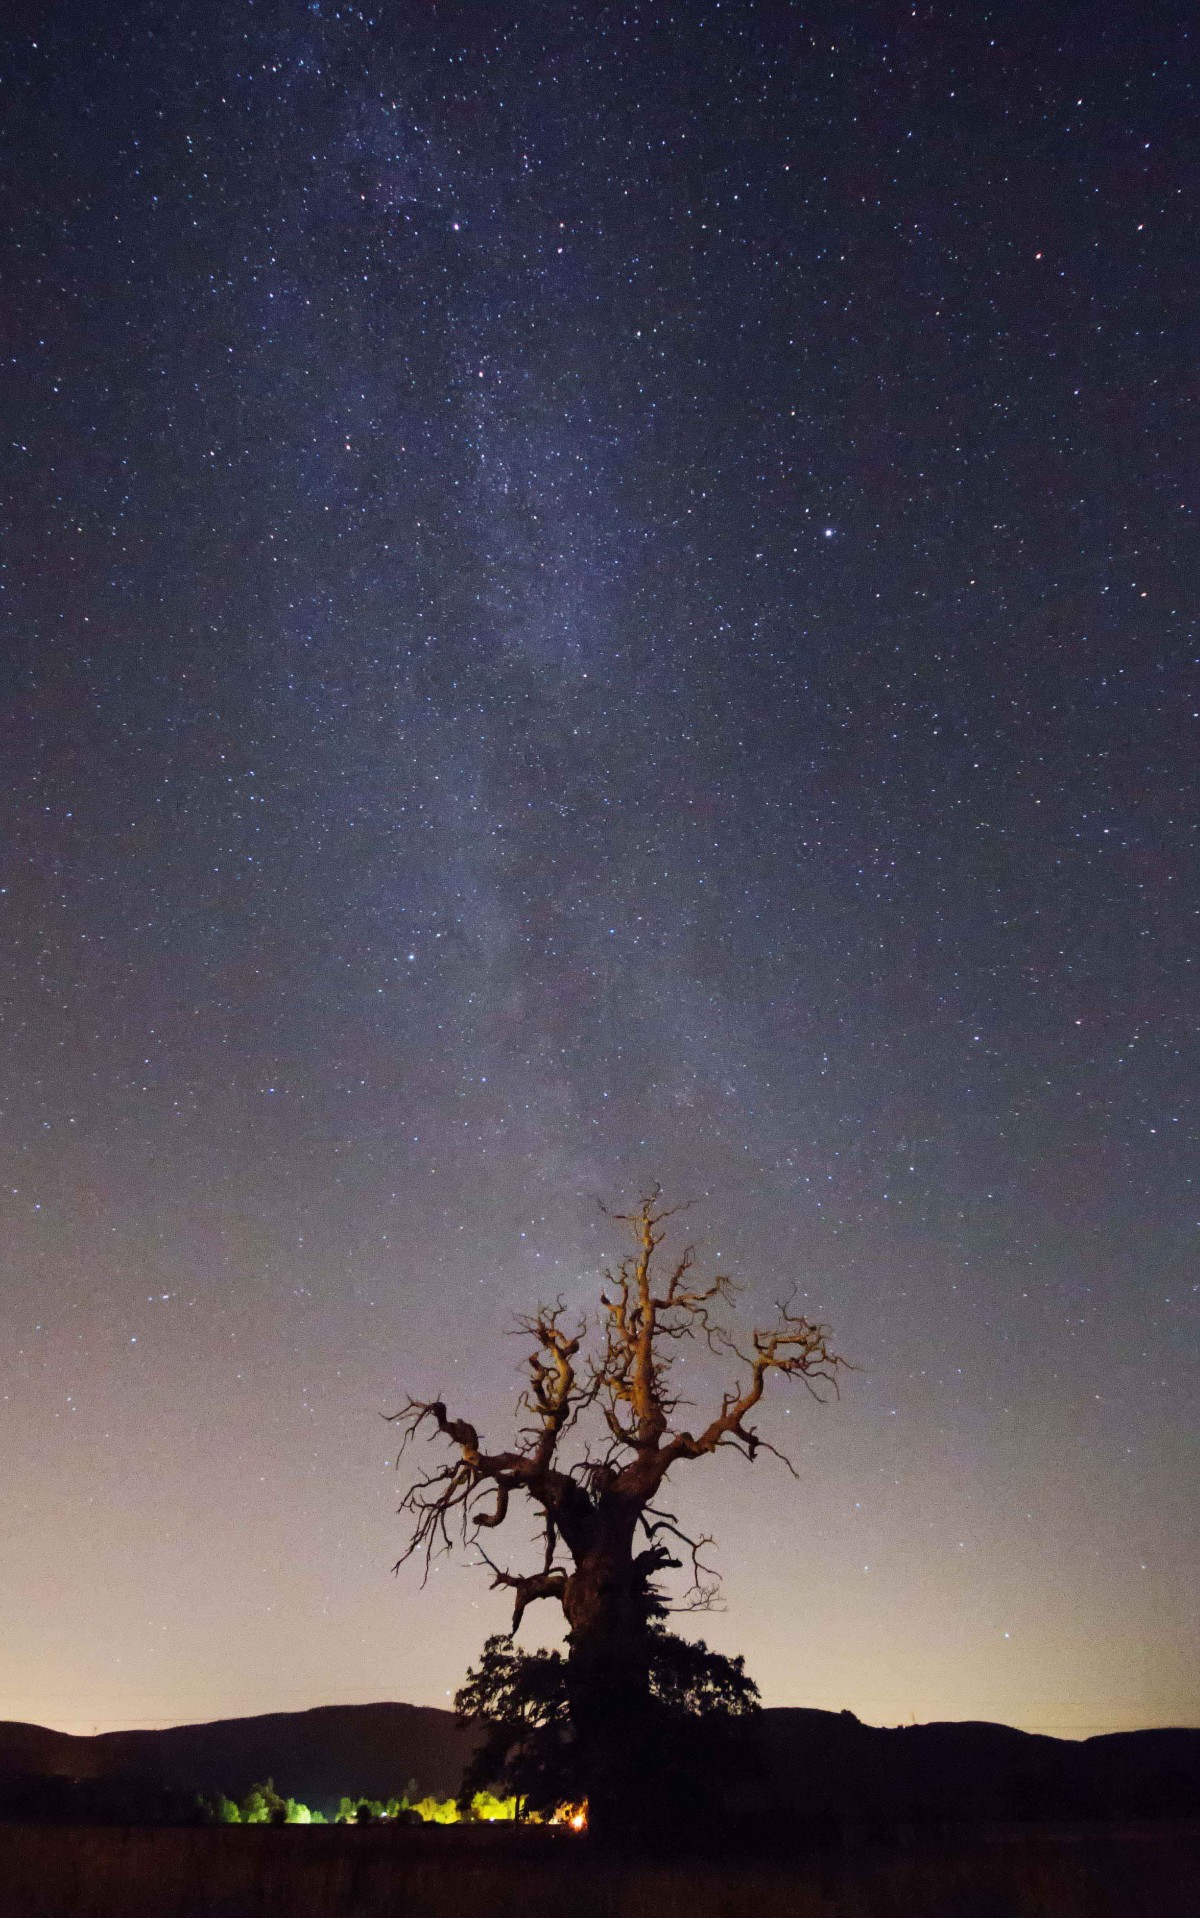 The Milky Way beaming down on a twisted tree in Brig.